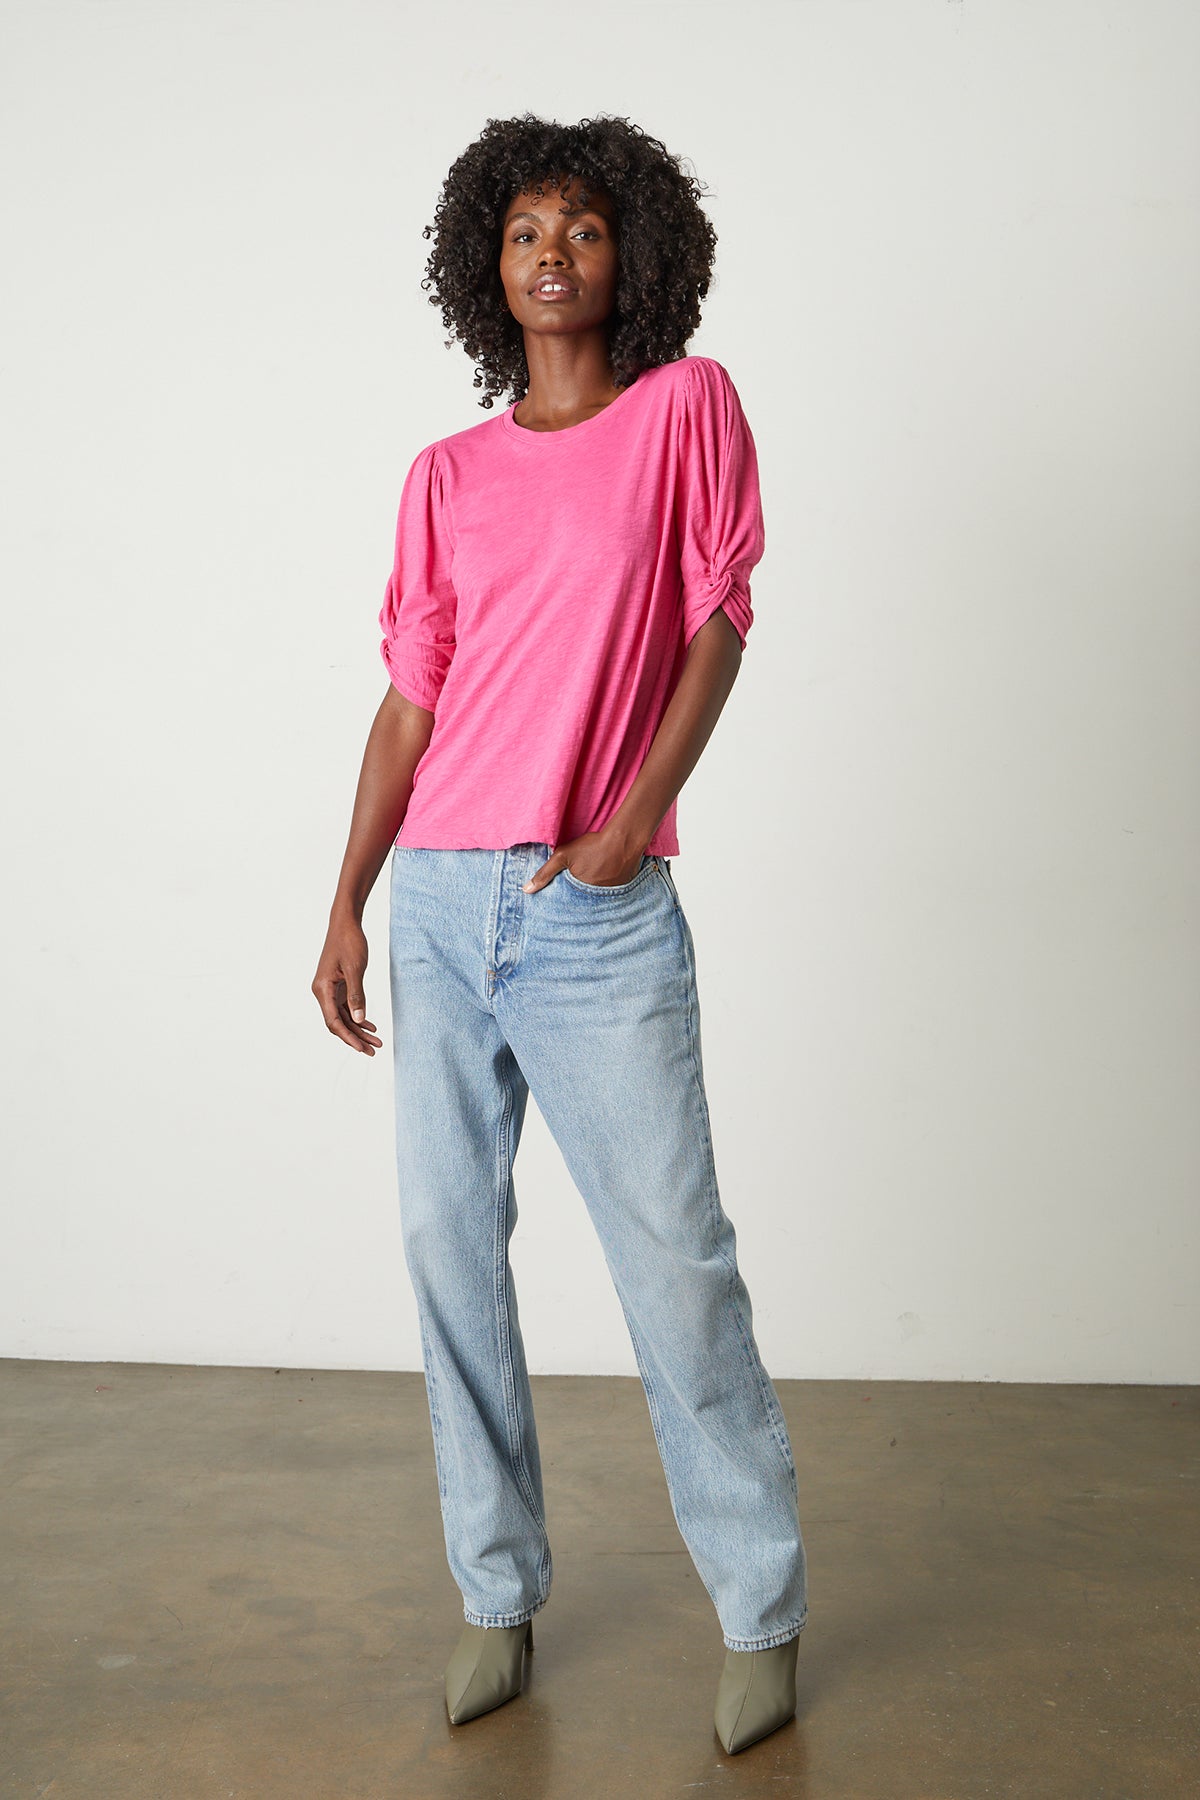   a black woman wearing a pink AMELIA PUFF SLEEVE TEE by Velvet by Graham & Spencer and jeans. 